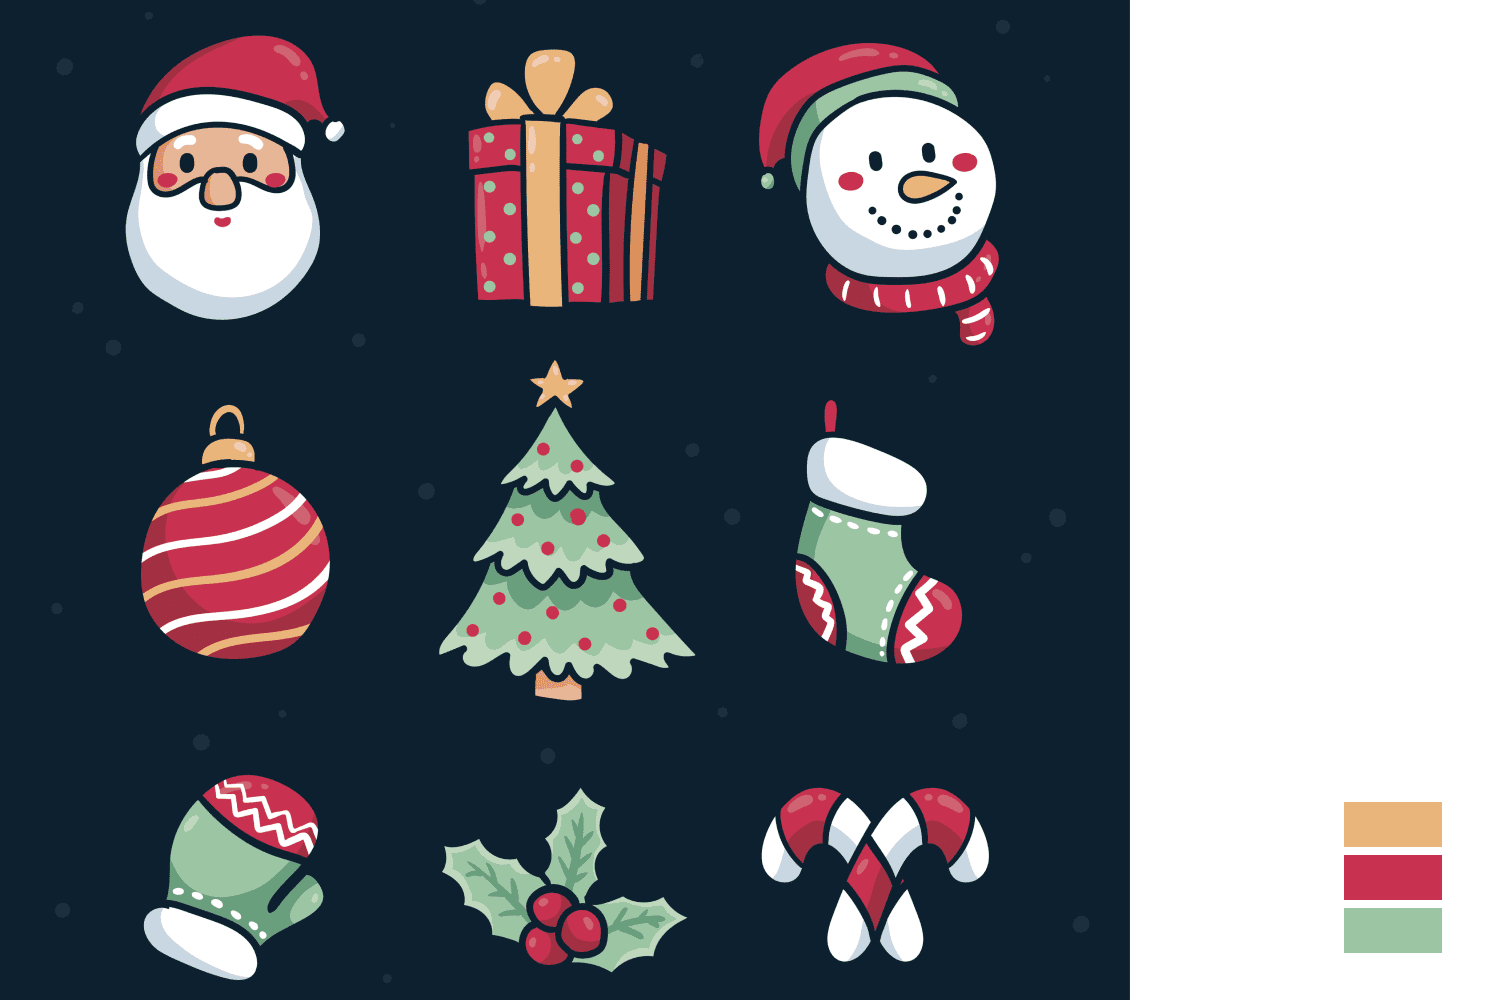 Collage of icons of snowman, Santa Claus, Christmas gifts, fir tree, toys and decorations.